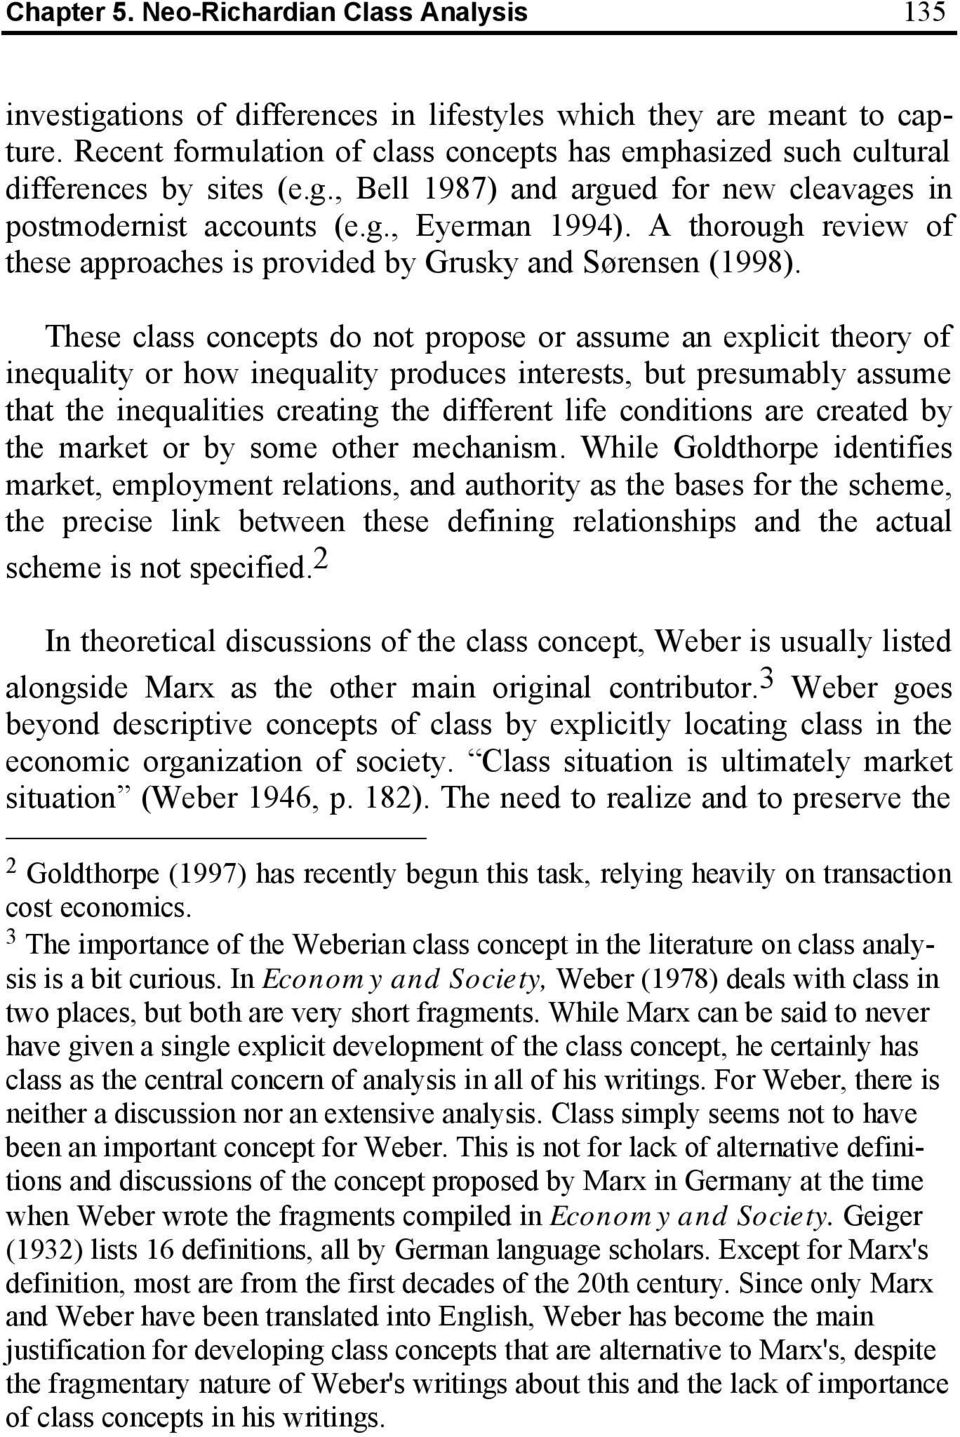 A thorough review of these approaches is provided by Grusky and Sørensen (1998).